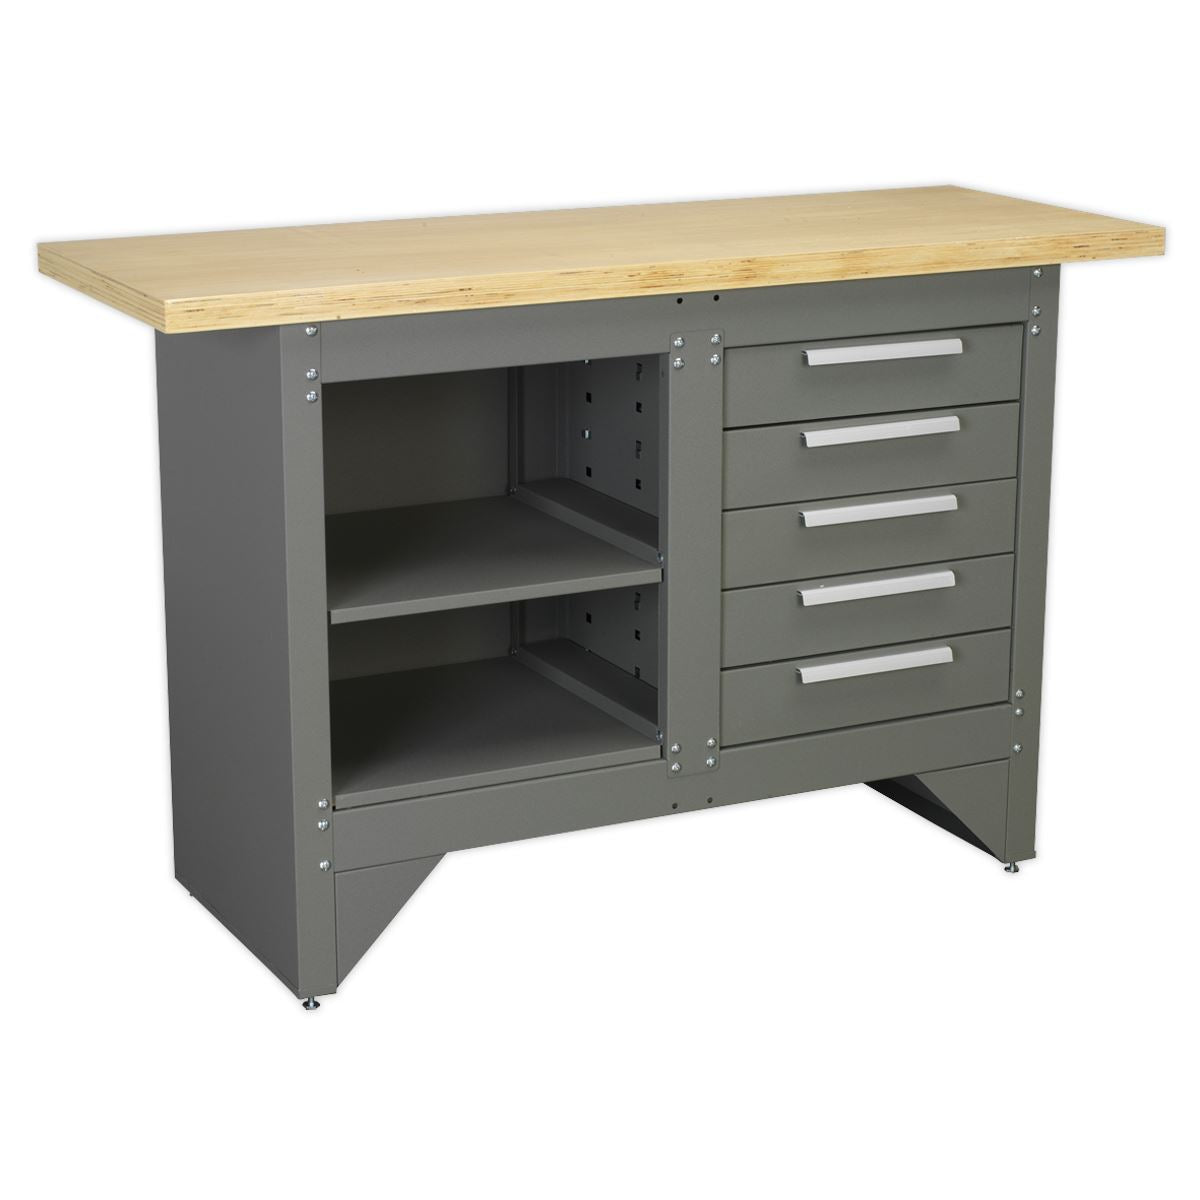 Sealey Workbench with 5 Drawers Ball-Bearing Slides Heavy-Duty